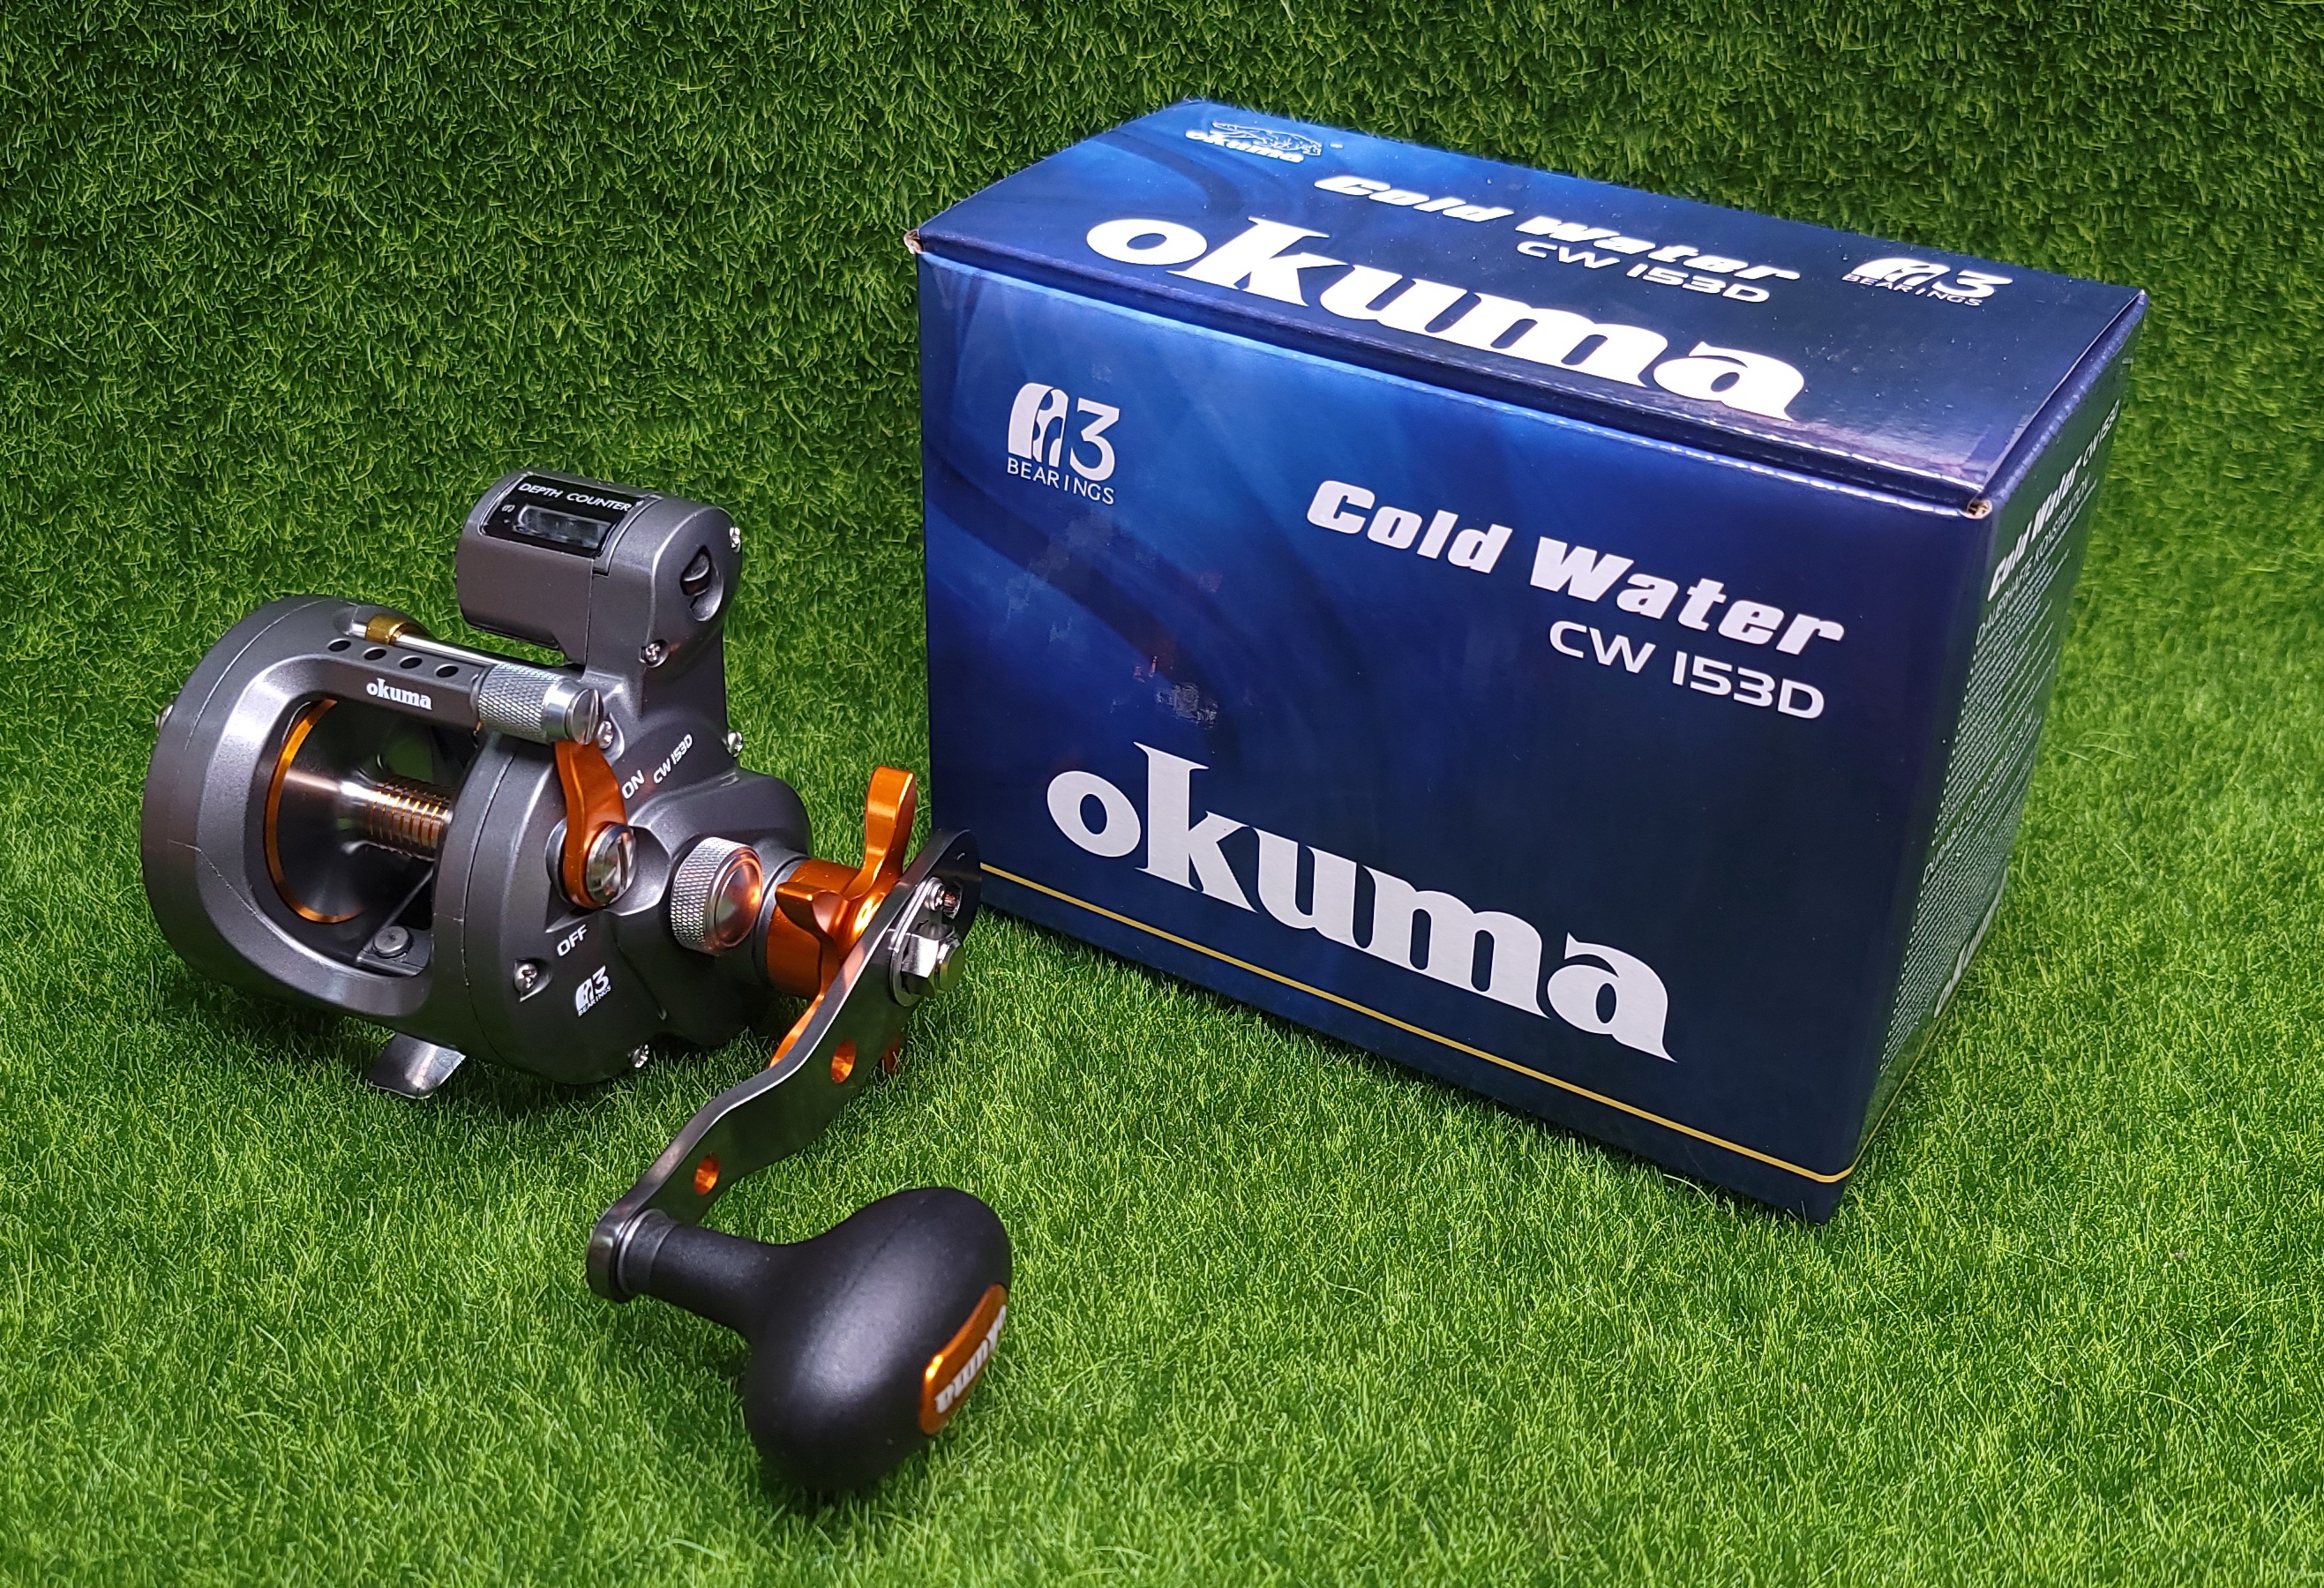 Okuma Cold Water Line Counter 5.1:1 Conventional Reel, RH - CW-153D -  Freshwater Fishing Reels at  : 1026559270